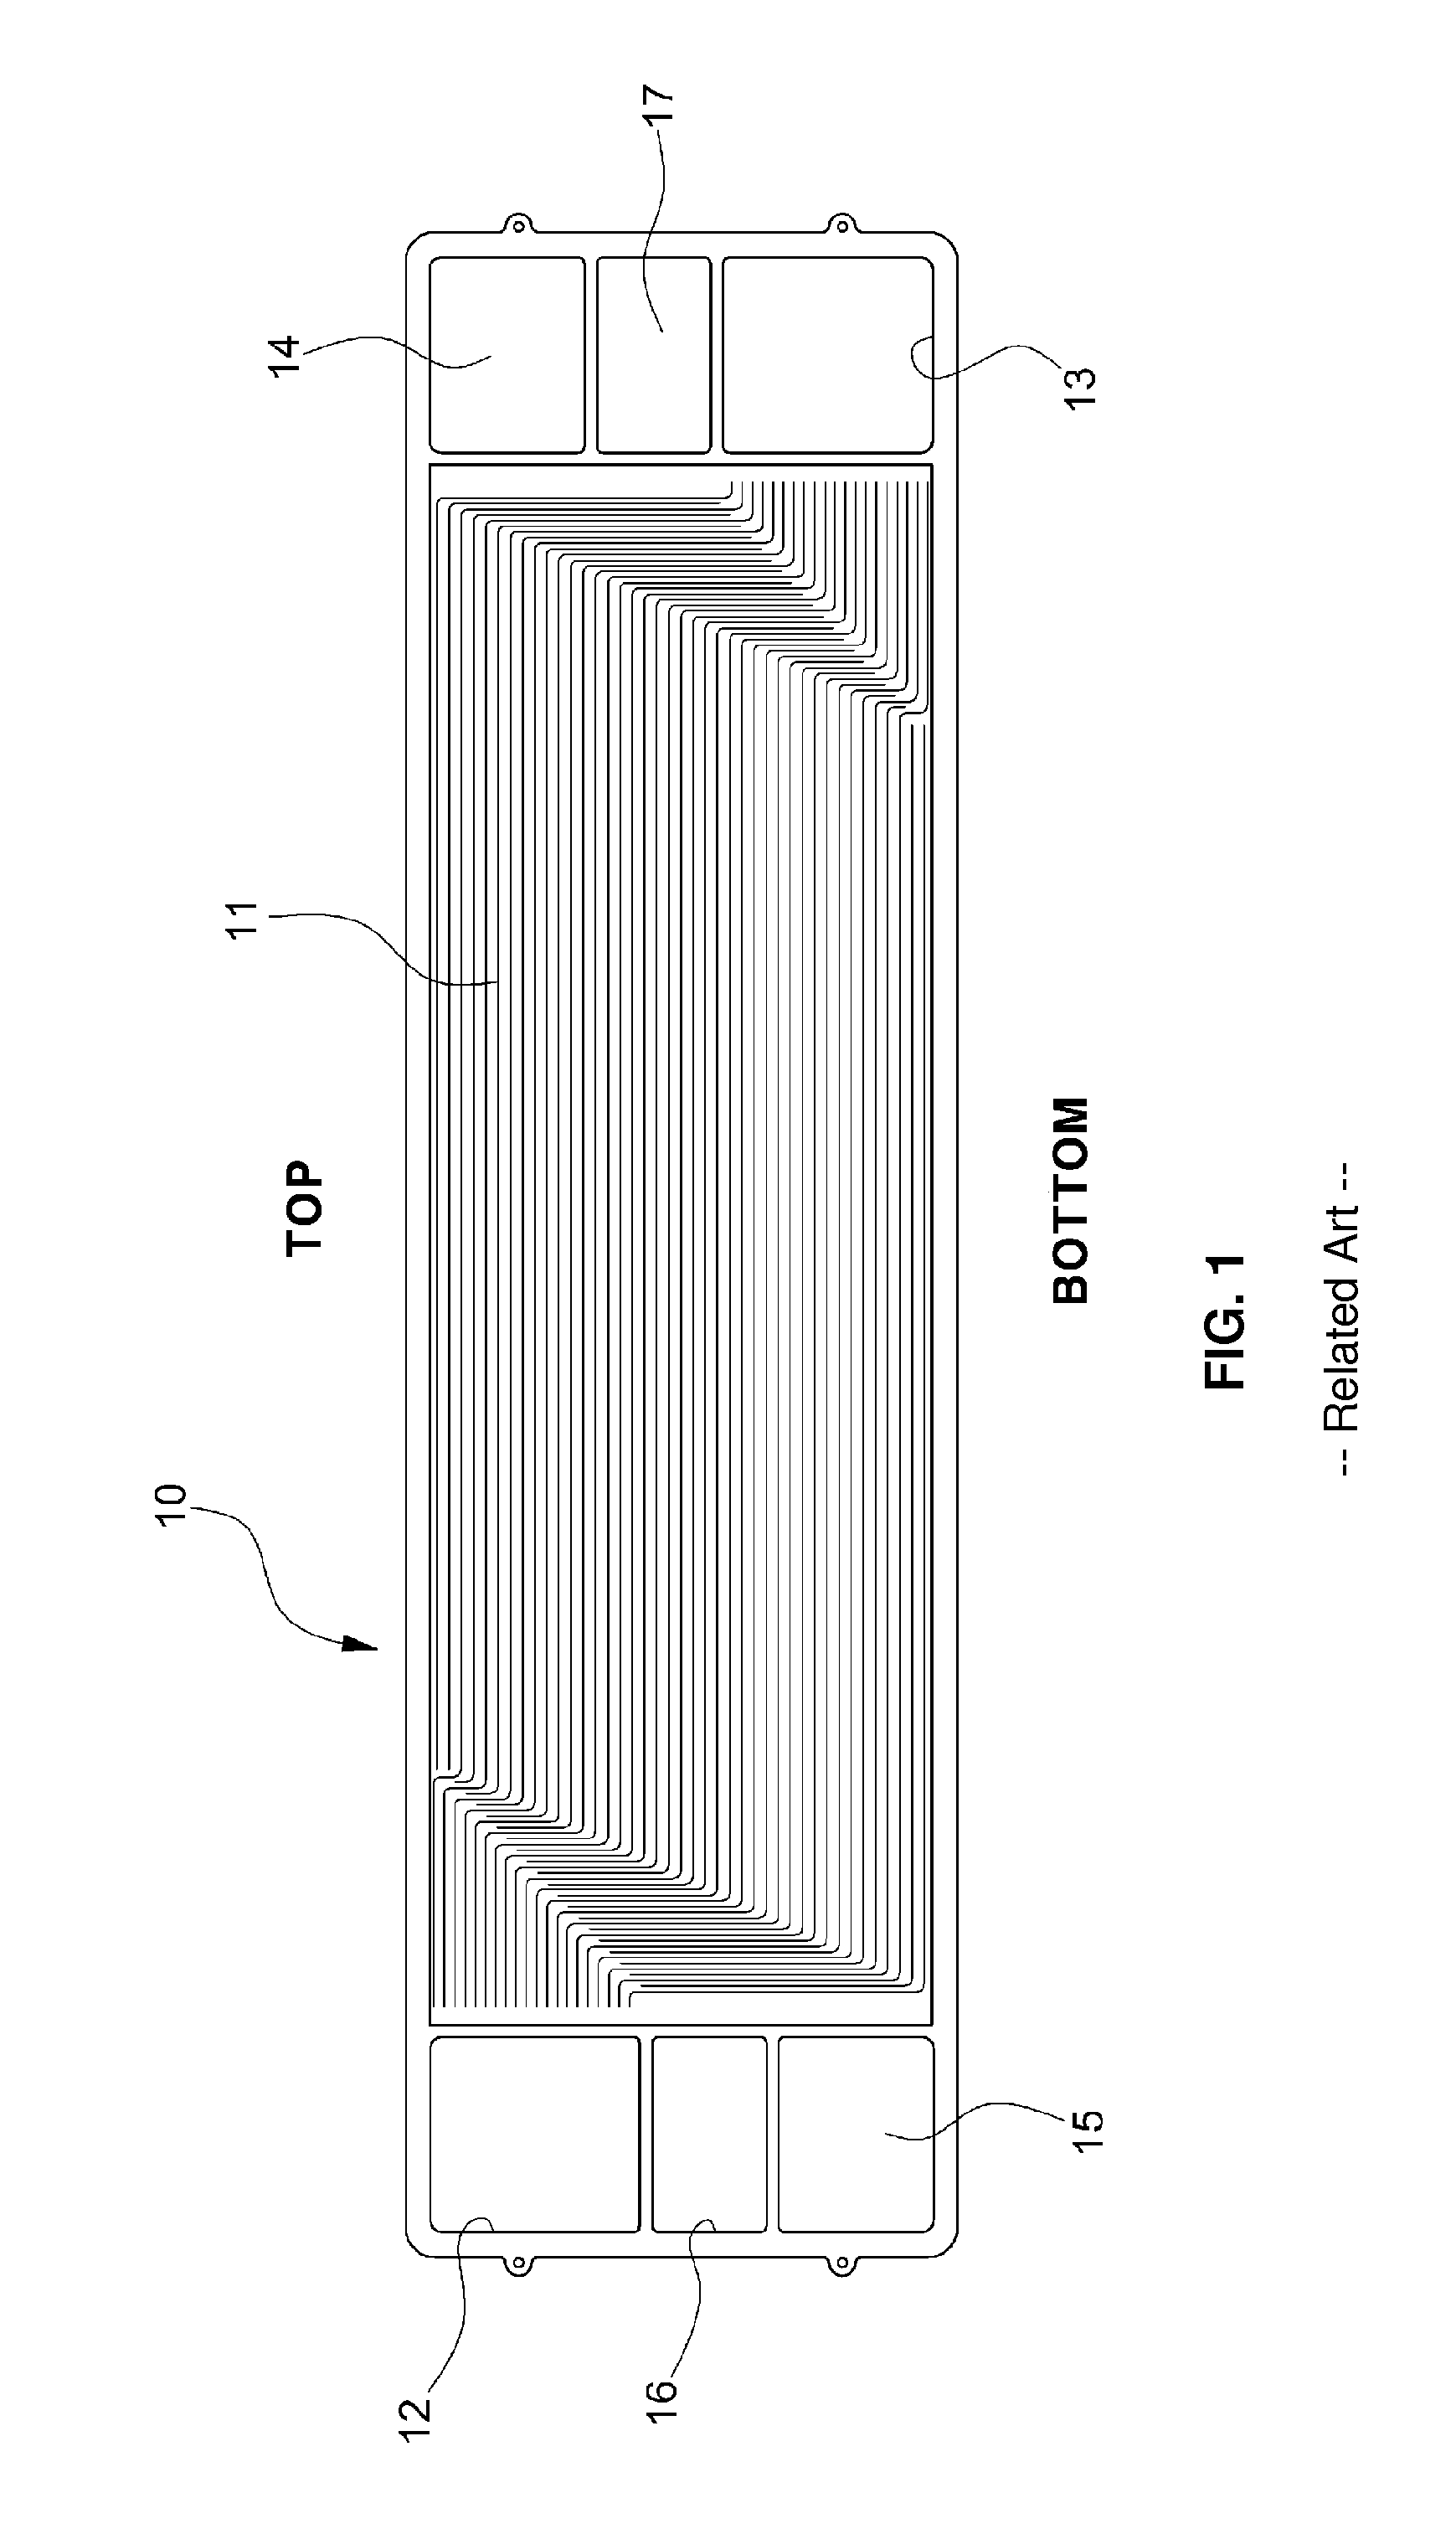 Bipolar plate structure for fuel cell